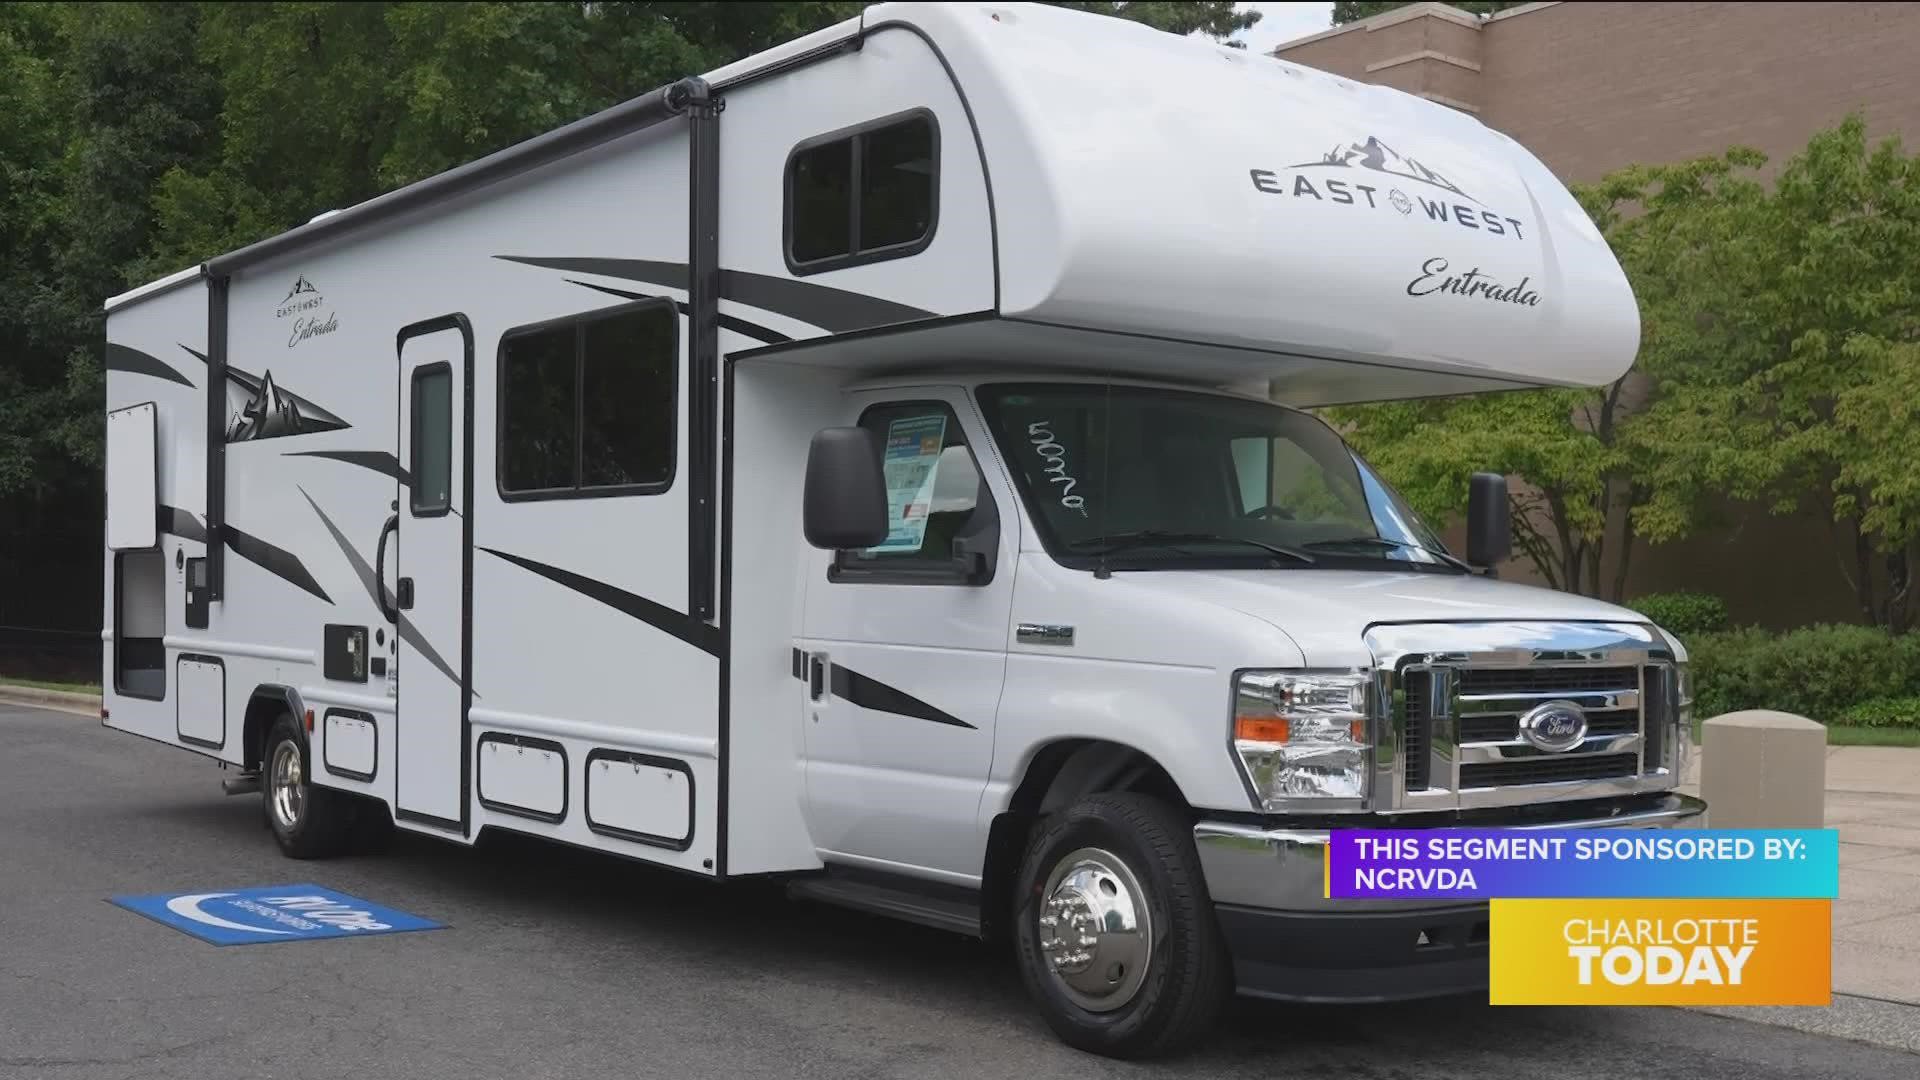 North Carolina largest RV show is coming to Charlotte